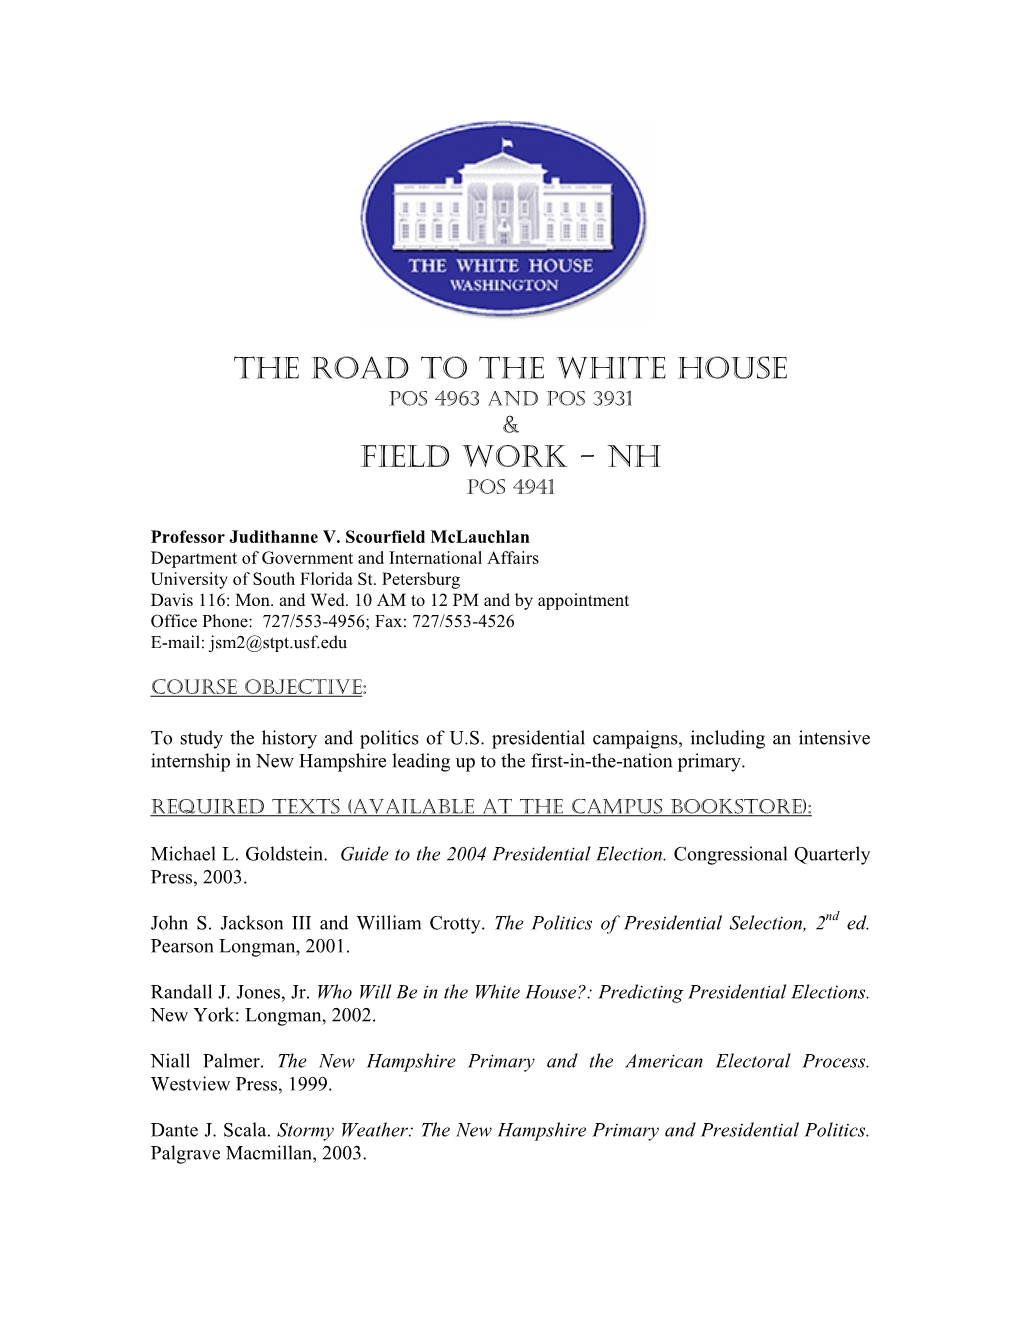 The Road to the White House Field Work